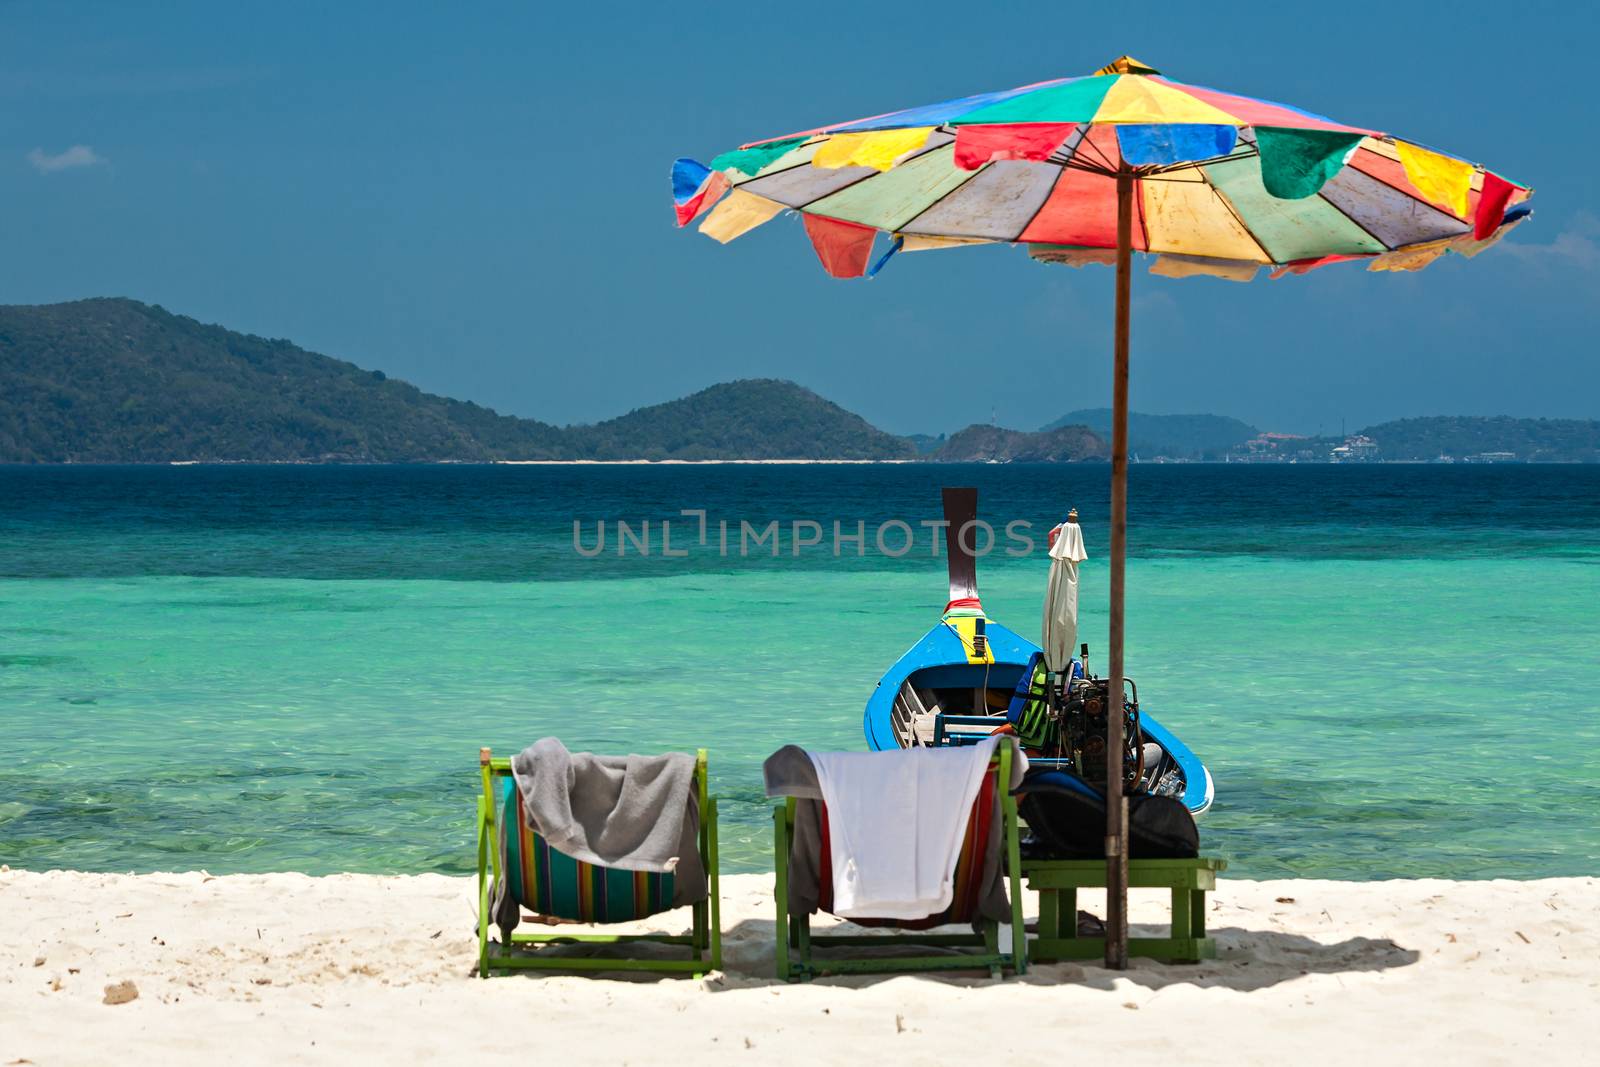 Beach umbrella chairs and boat in Coral island, Thailand by LuigiMorbidelli